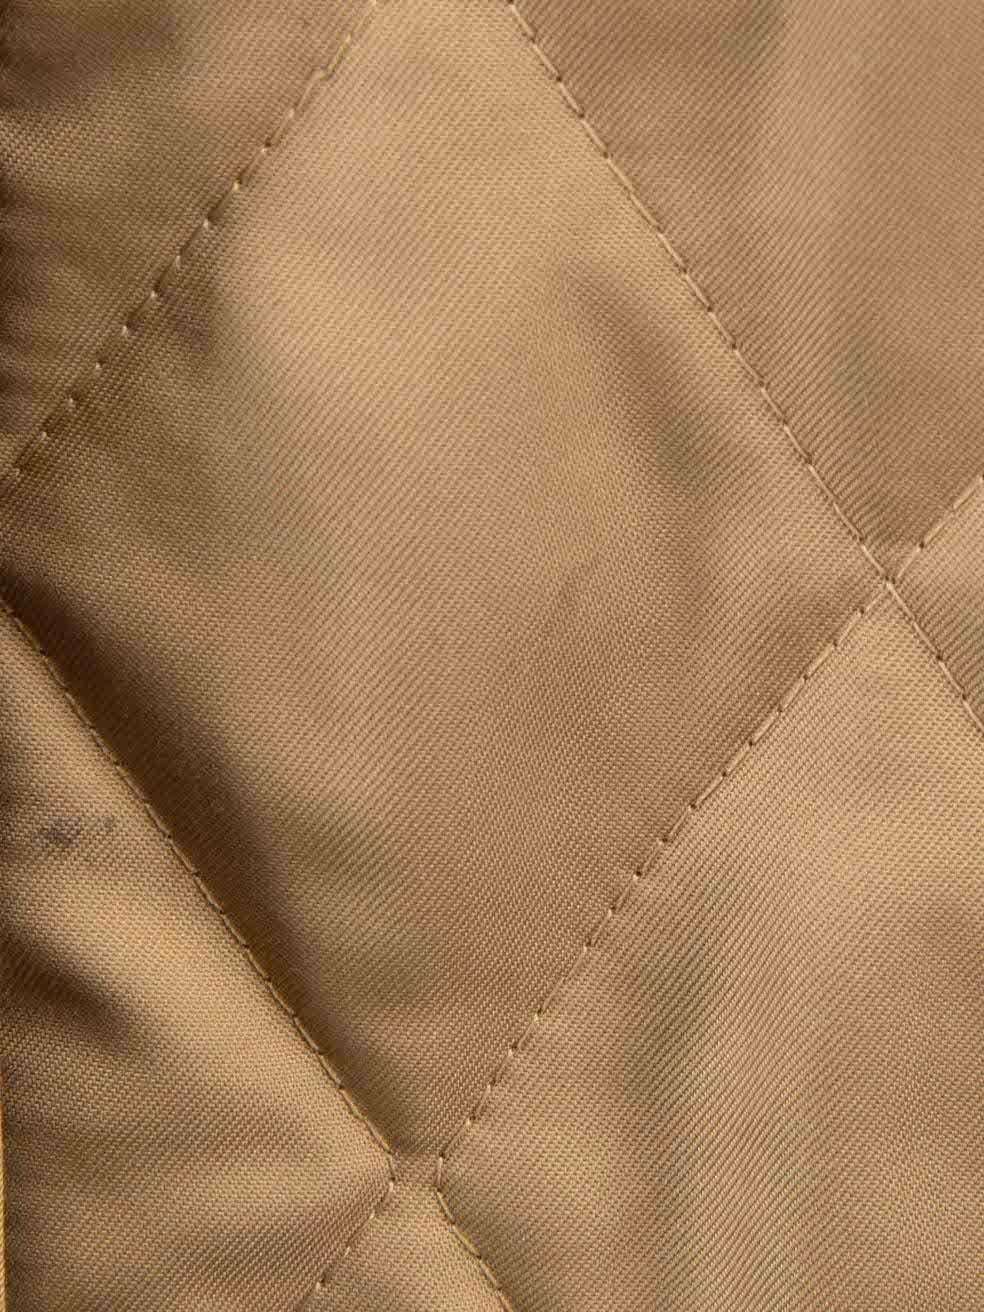 Tan Quilted Belted Jacket Size L 2